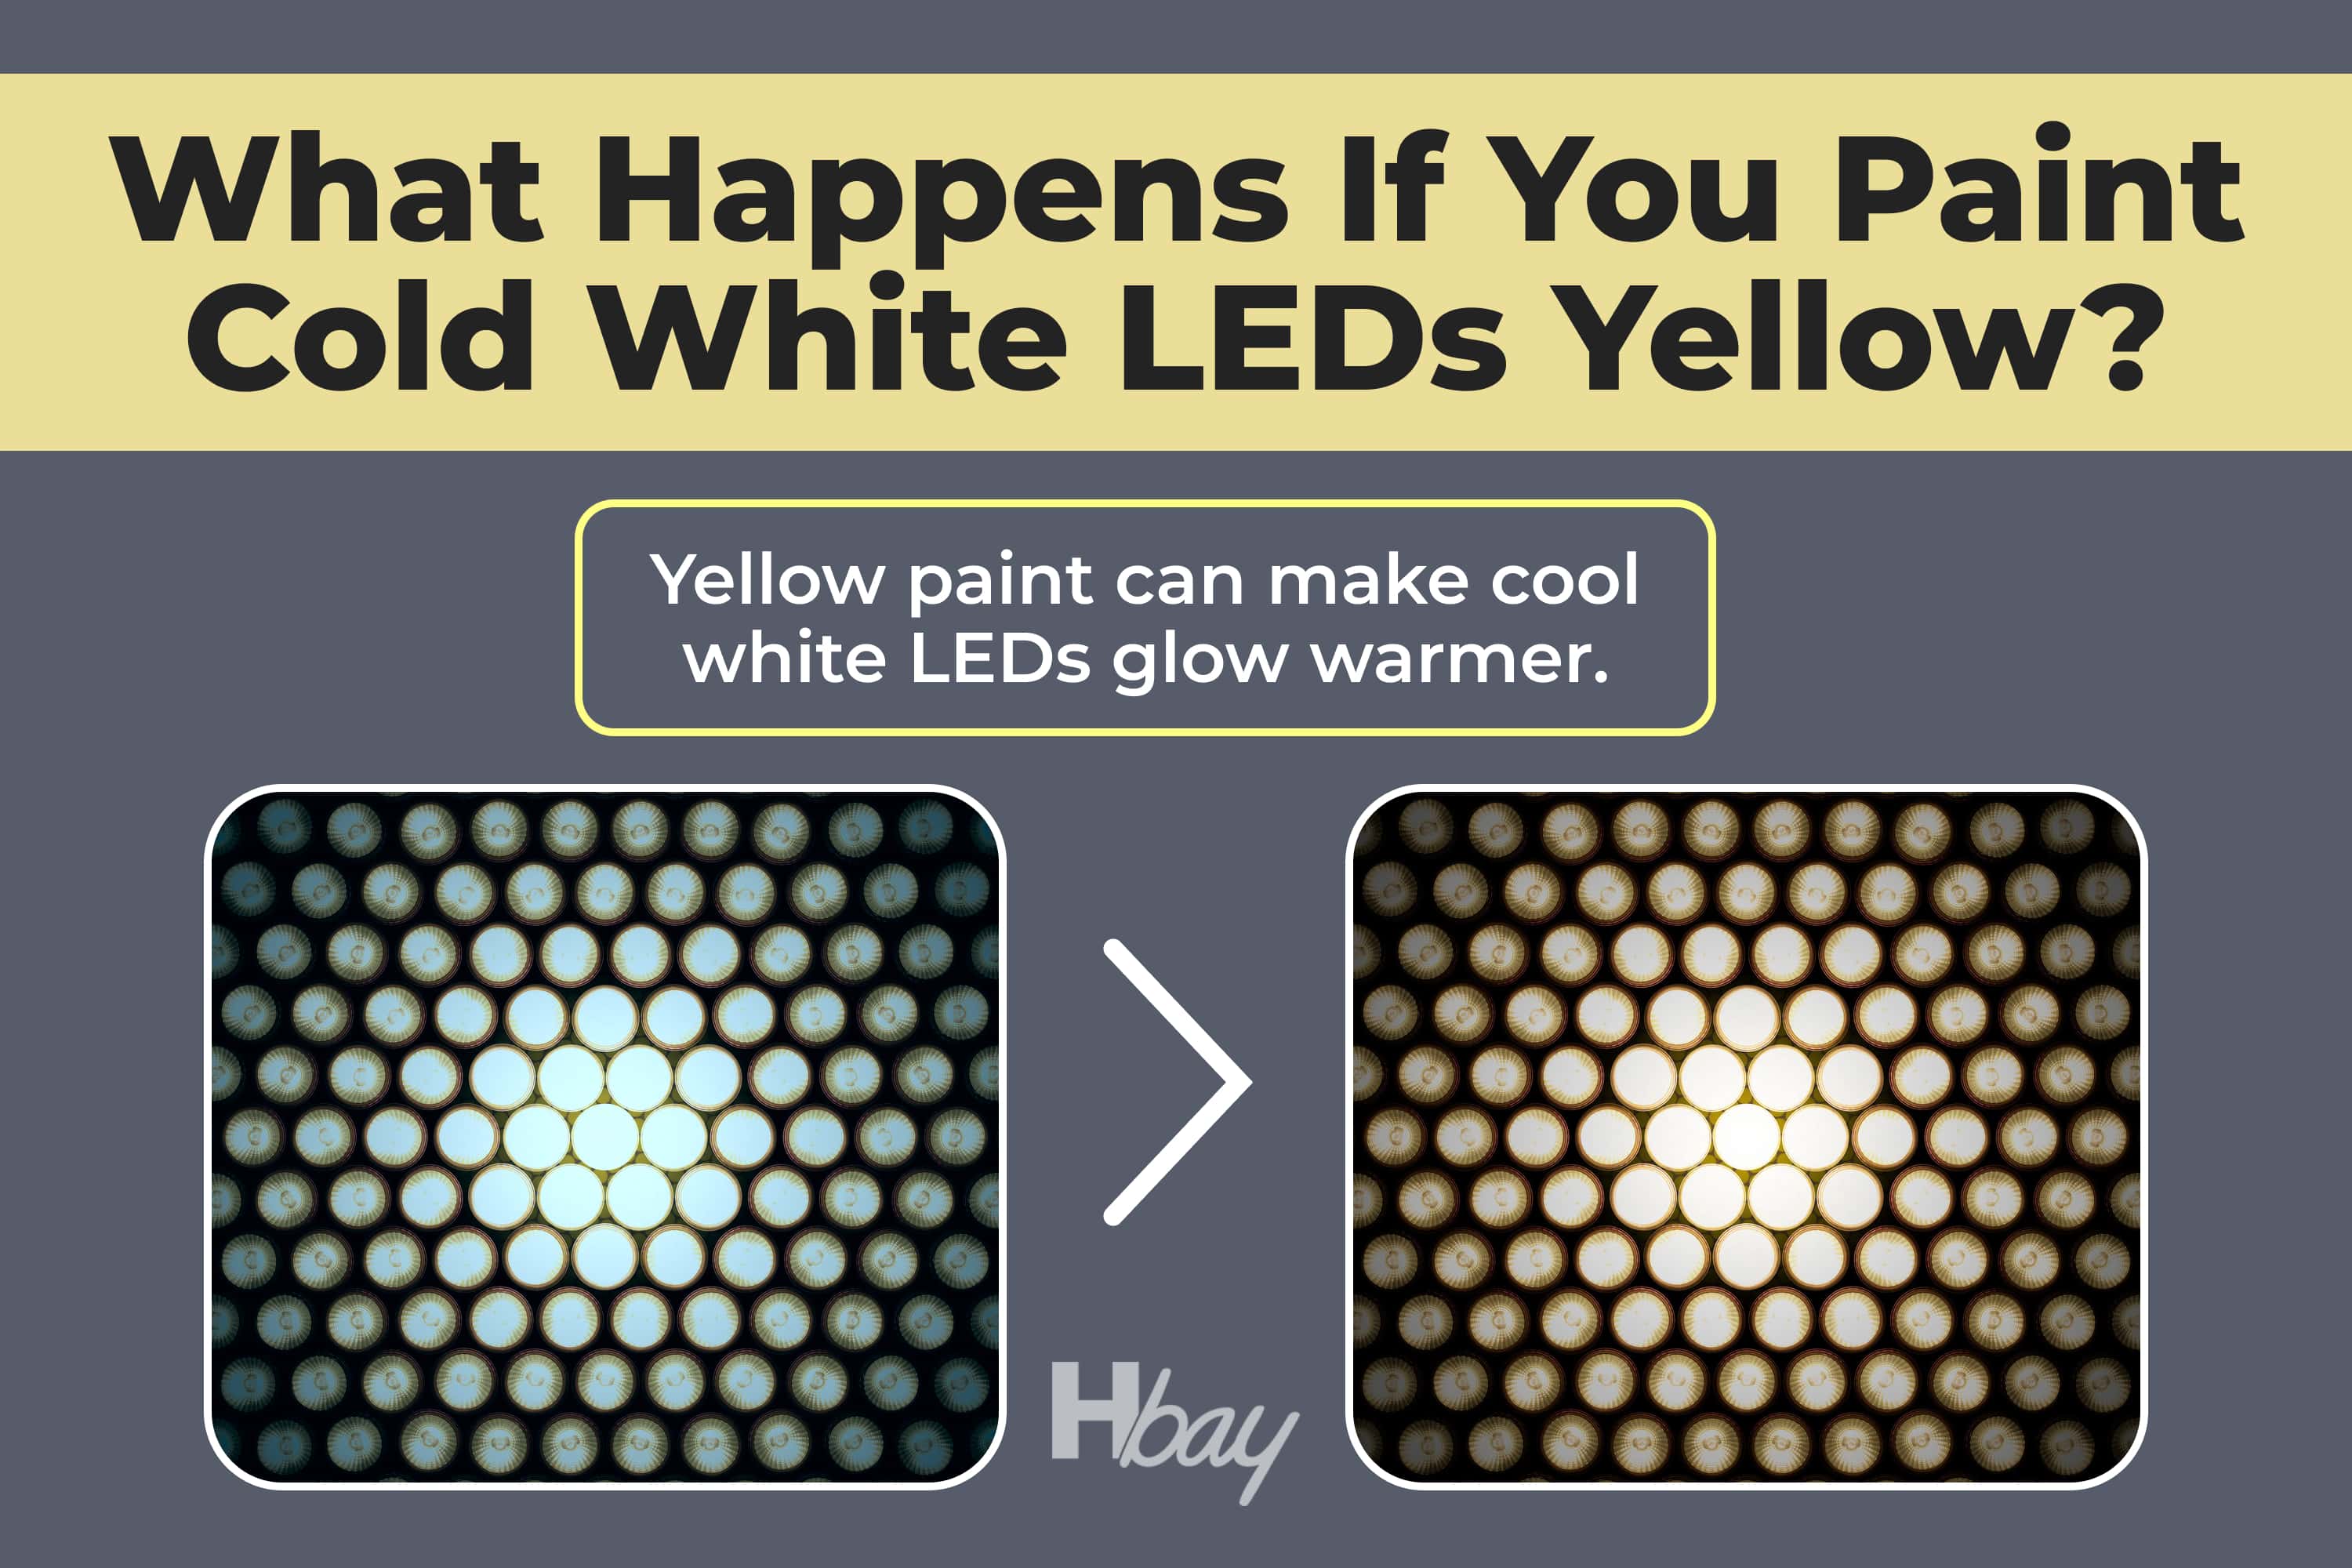 What happens if you paint cold white LEDs yellow